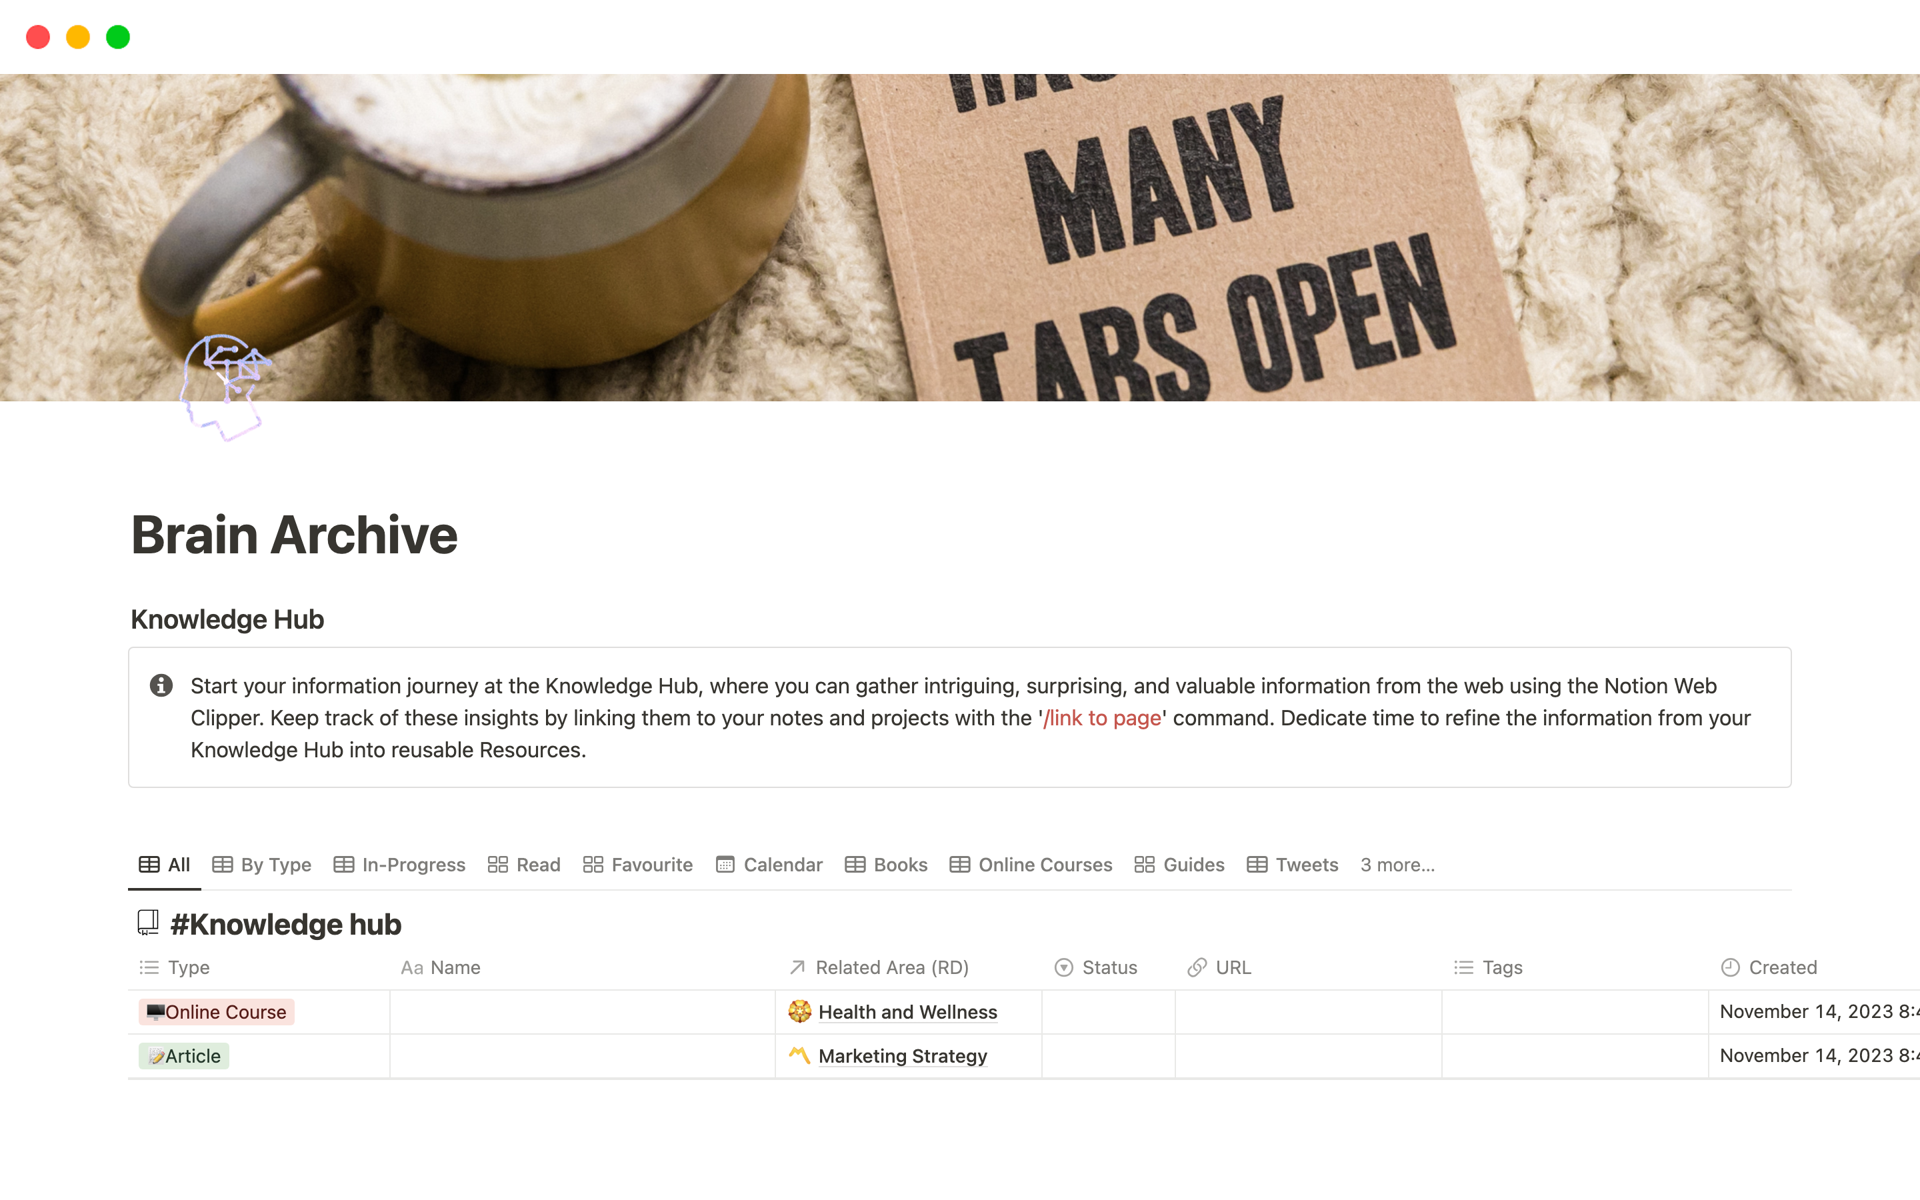 A detailed structure for organizing information and tasks using Notion. This setup includes sections for Knowledge Hub, Actions, Projects, Areas, Resources, Archive, and Notes, each with its own purpose and functionality.